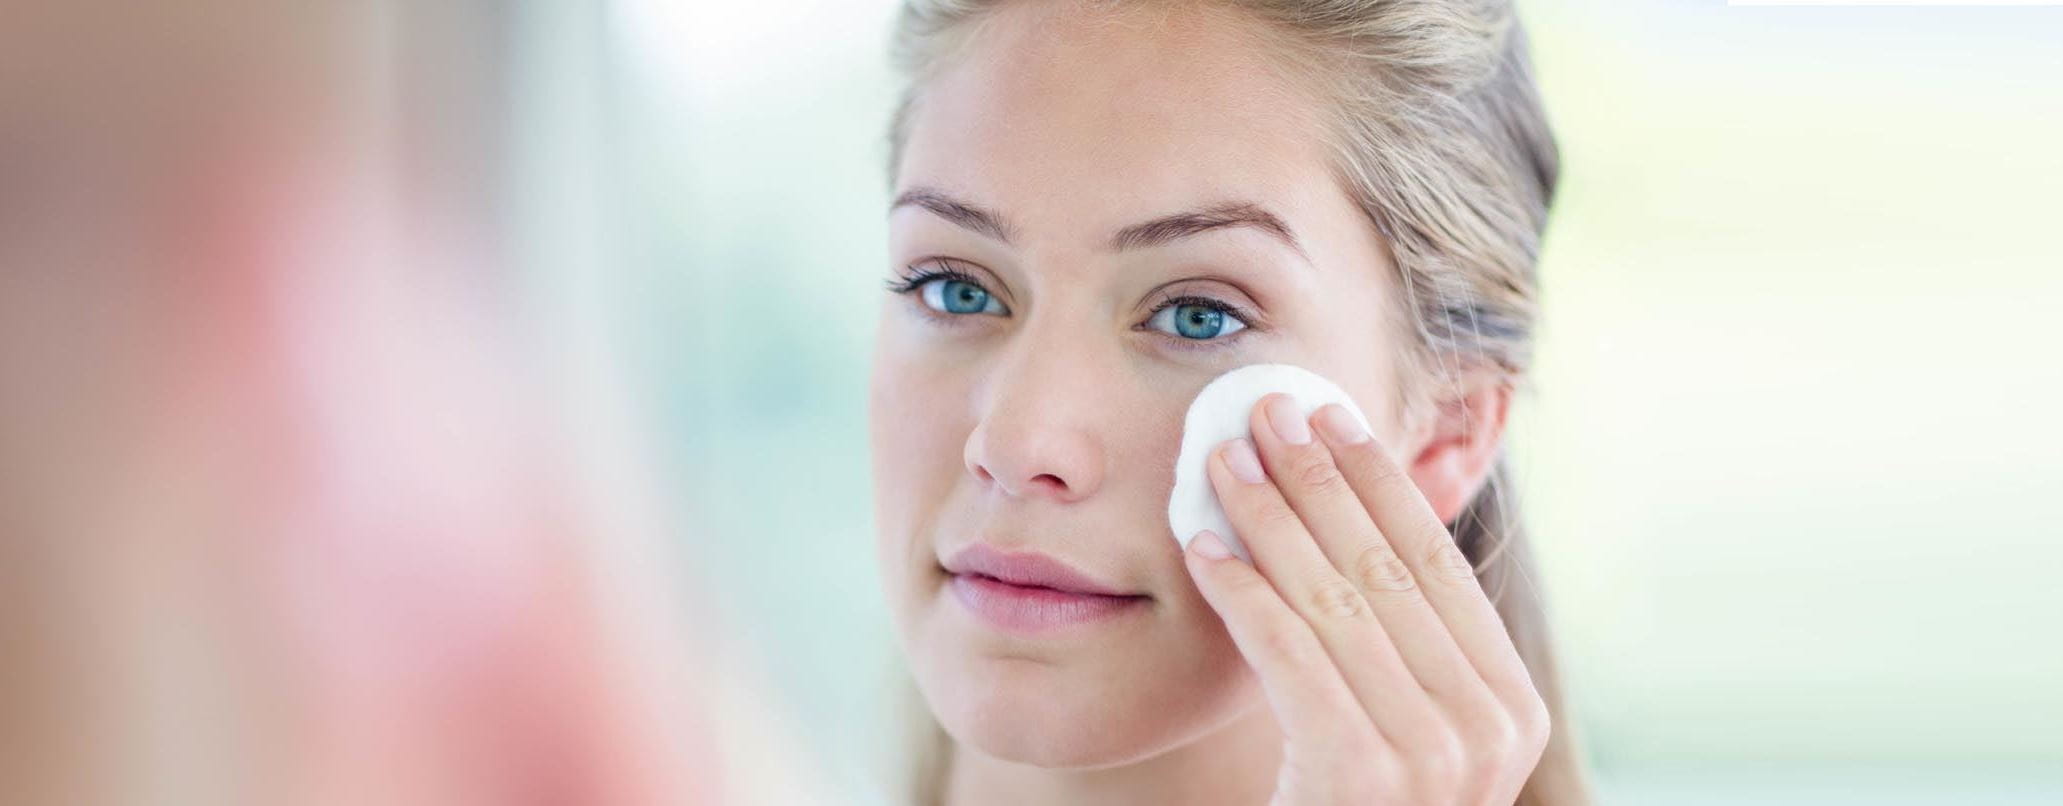 HOW TO RECOGNISE SENSITIVE SKIN?